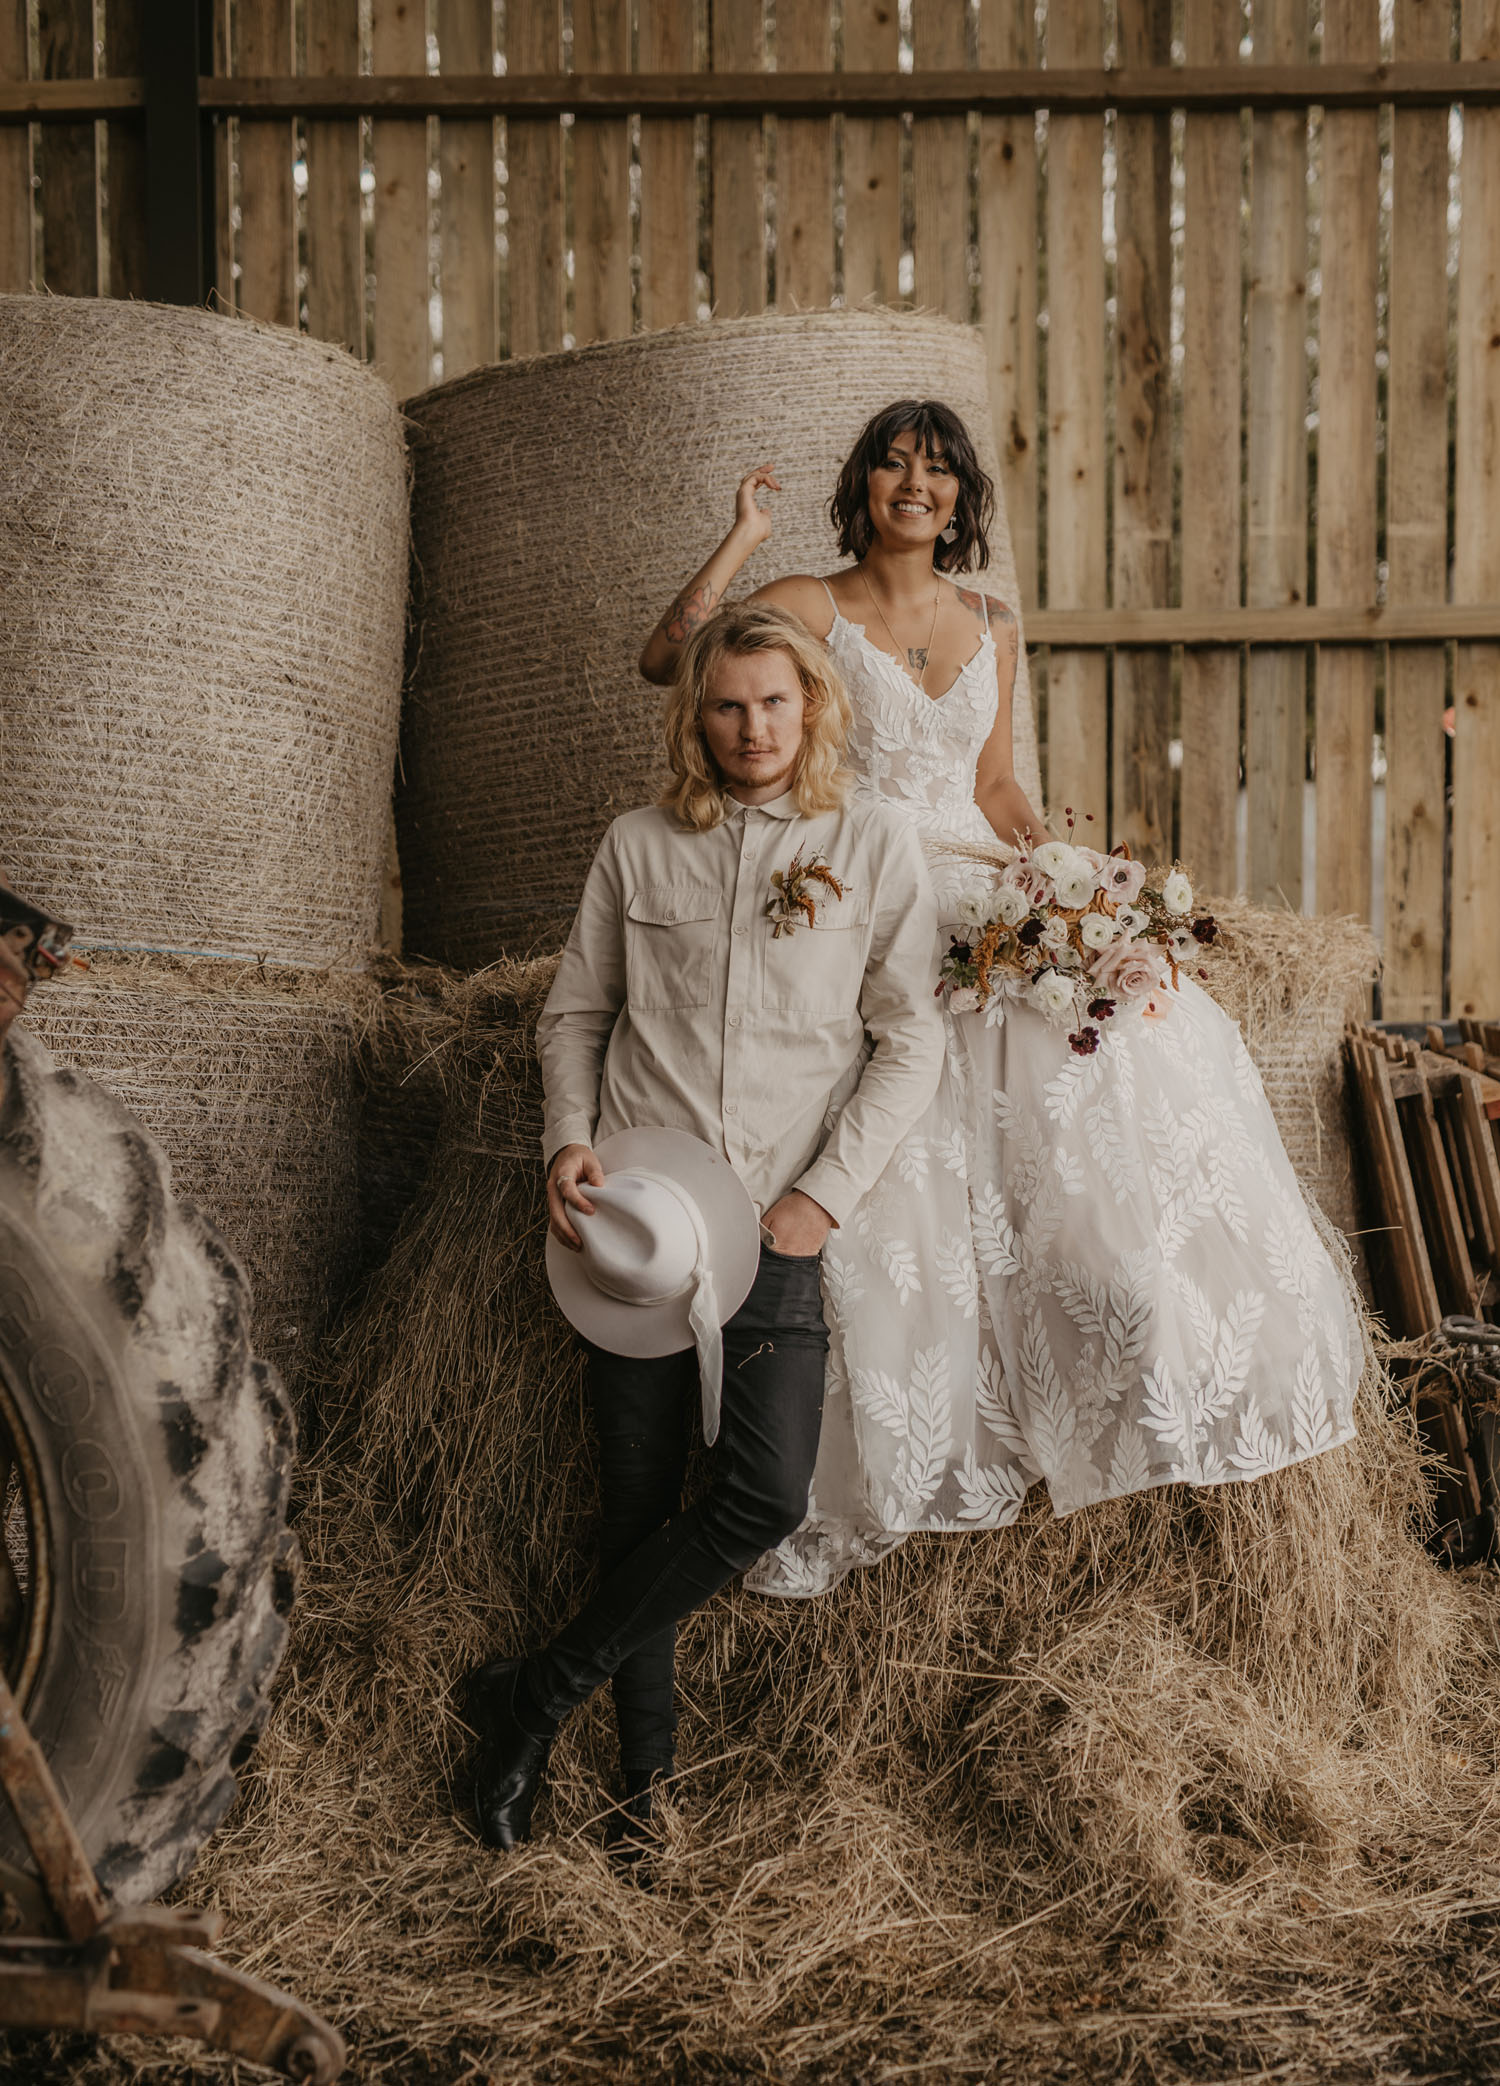 Here’s The New Boho Twist on the Old-Fashioned Rustic Barn Wedding